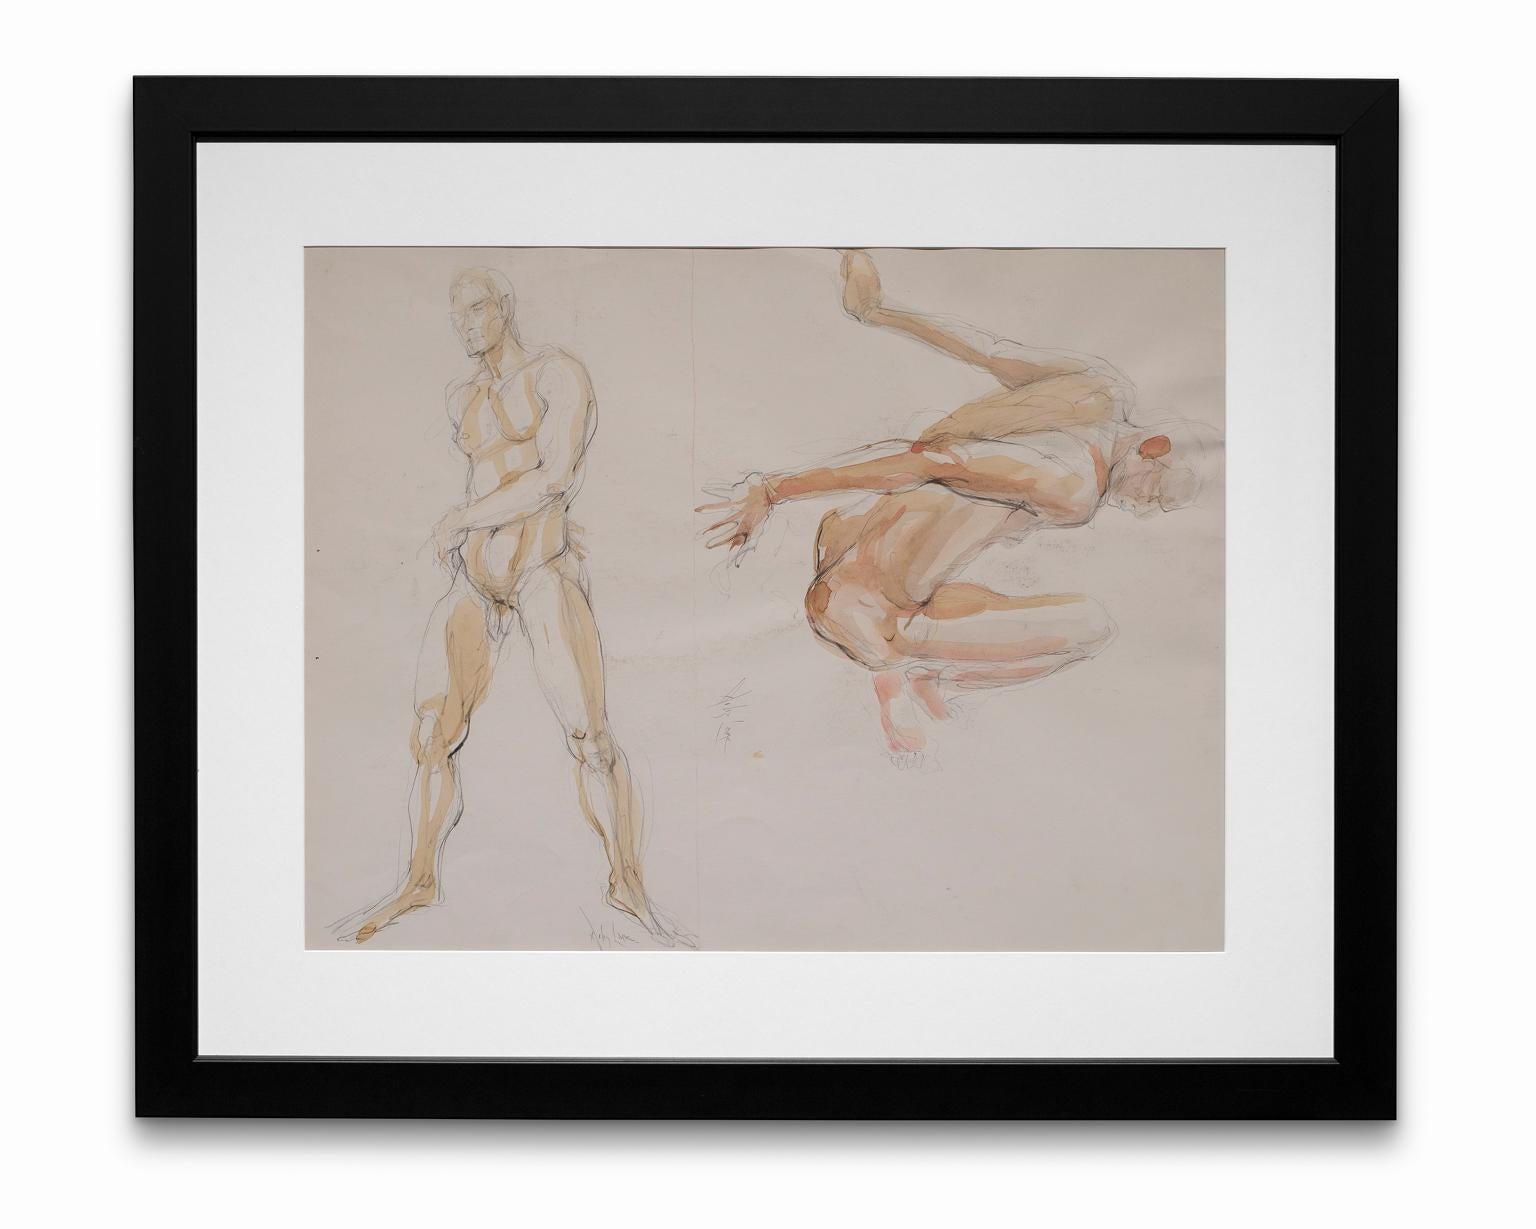 Artis Lane Nude Painting - "Nude Study #2", Watercolor and Graphite on Paper